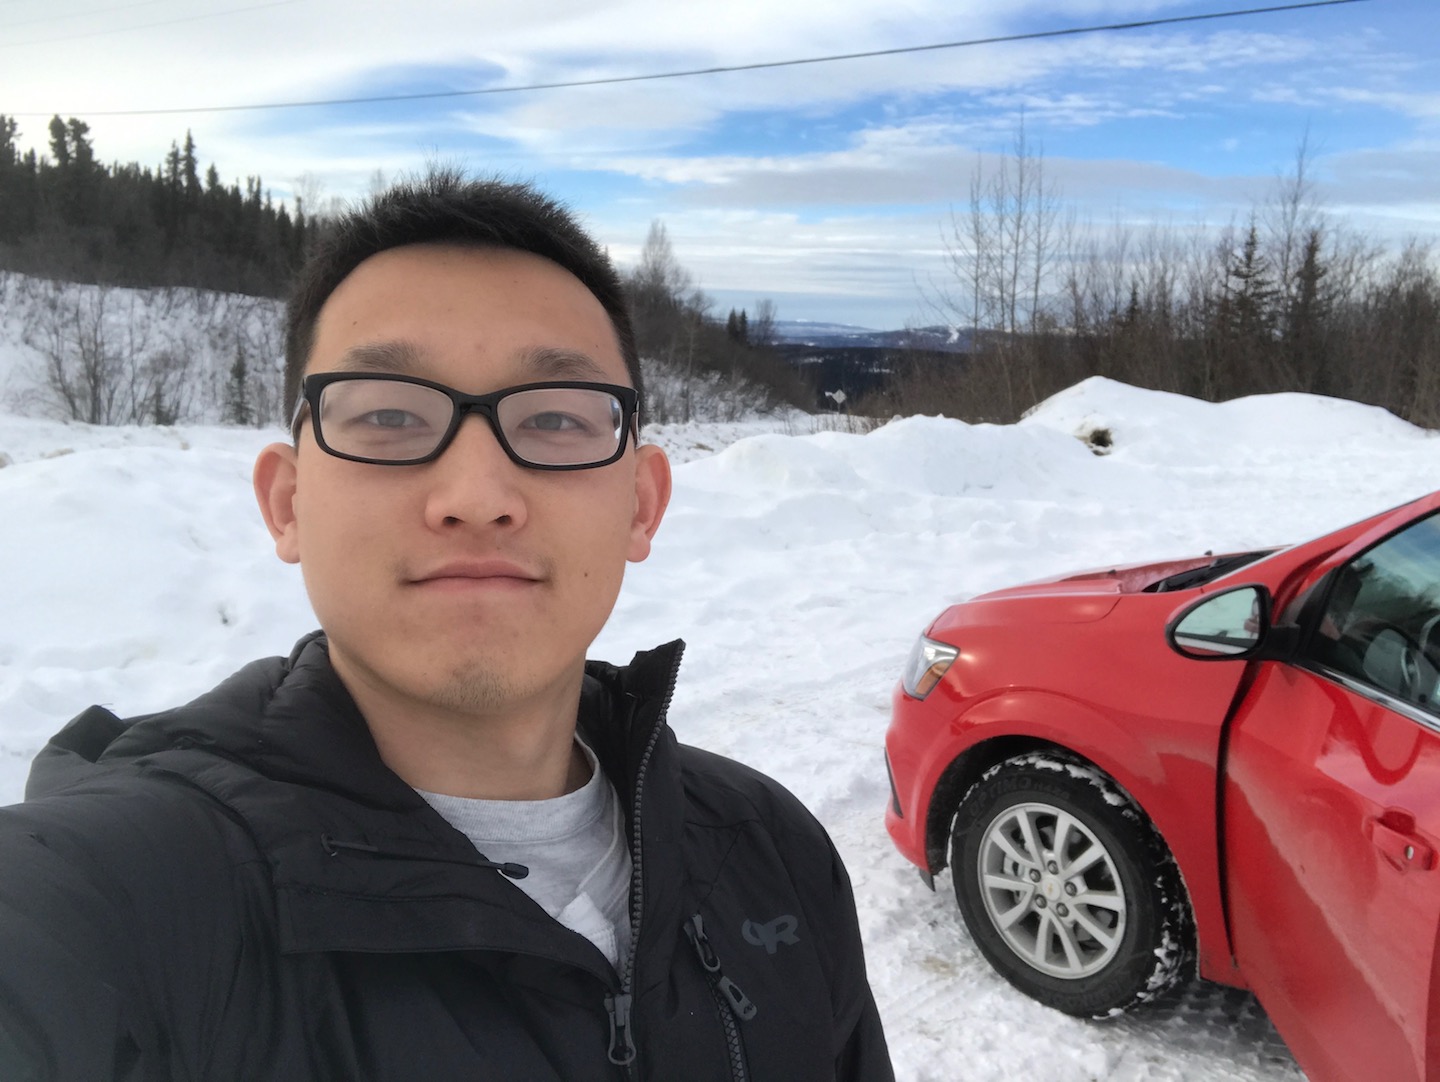 Me with my trusty red rental car, taking a selfie with some snow at Cleary Summit